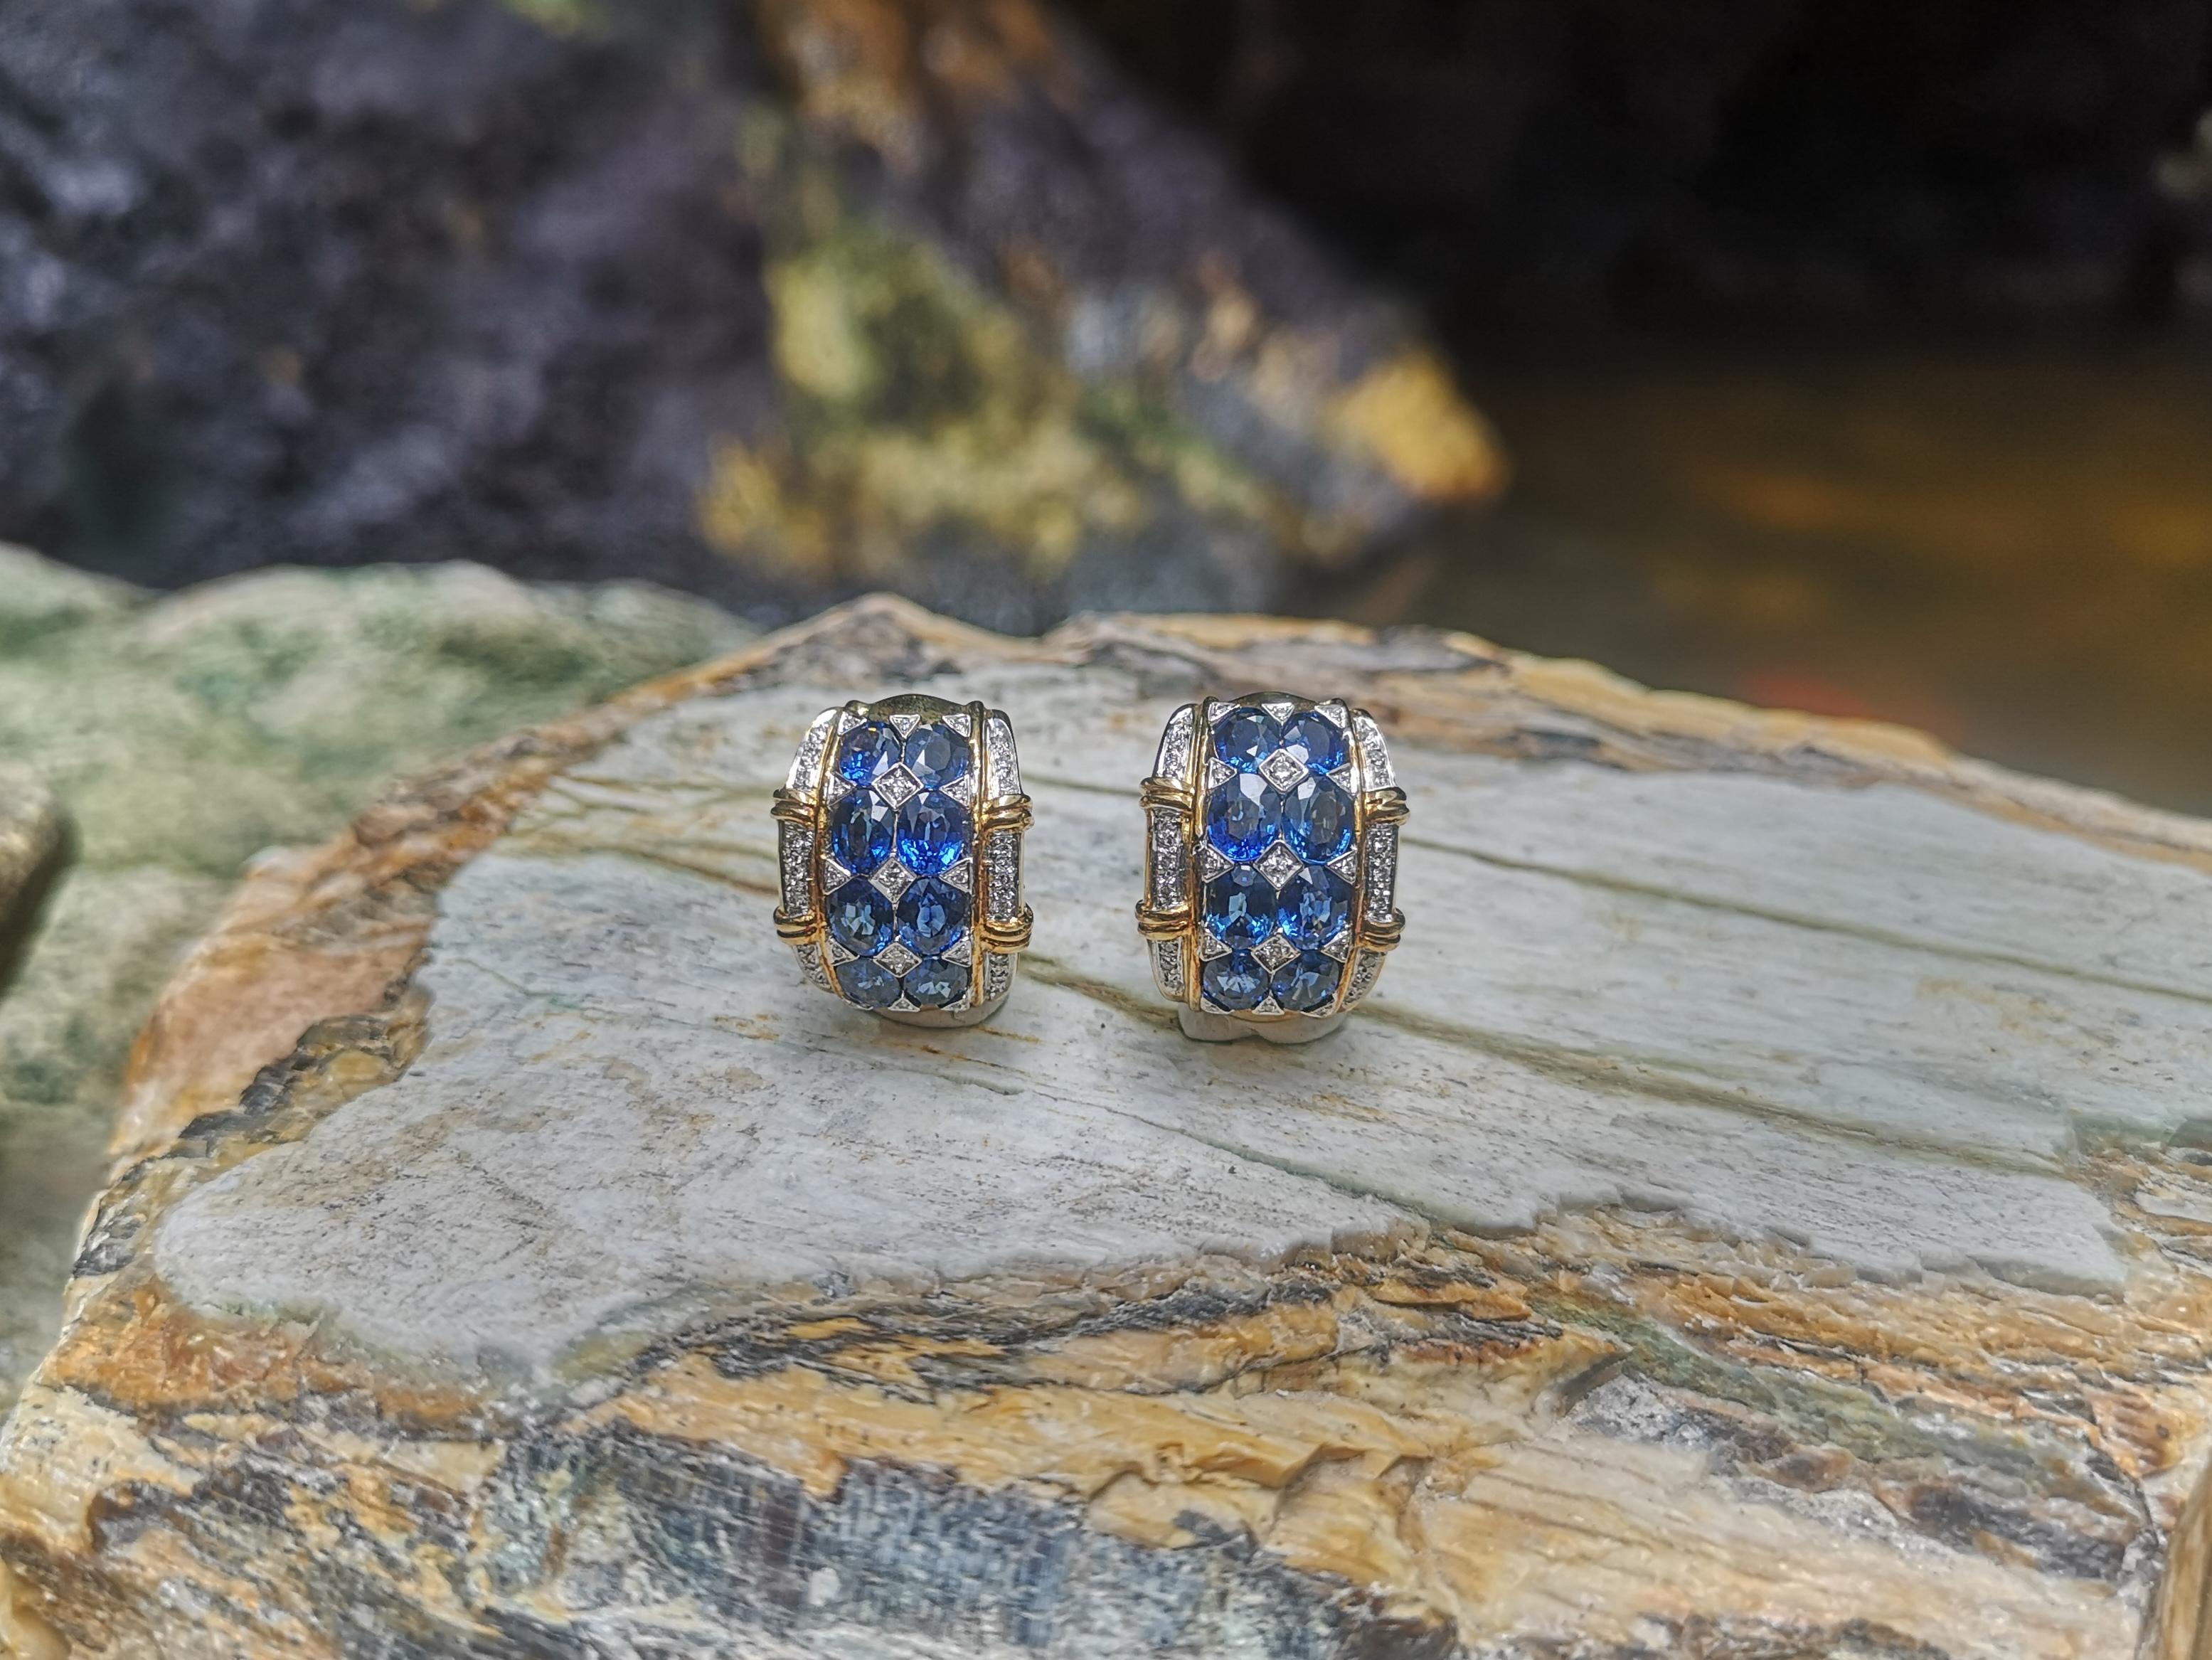 Blue Sapphire 7.98 carats with Diamond 0.35 carat Earrings set in 18 Karat Gold Settings

Width:  1.5 cm 
Length: 2.0 cm
Total Weight: 19.52 grams

